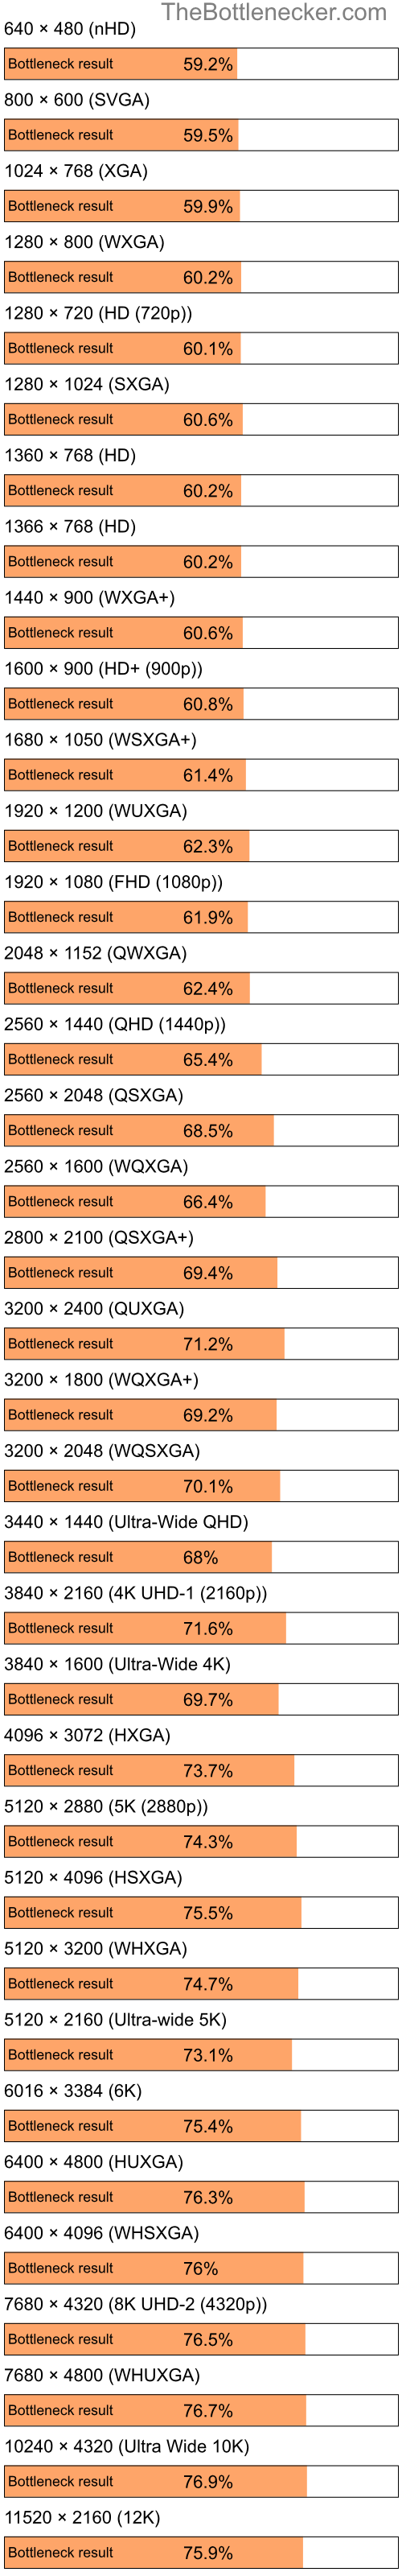 Bottleneck results by resolution for Intel Pentium 4 and NVIDIA GeForce G210 in7 Days to Die